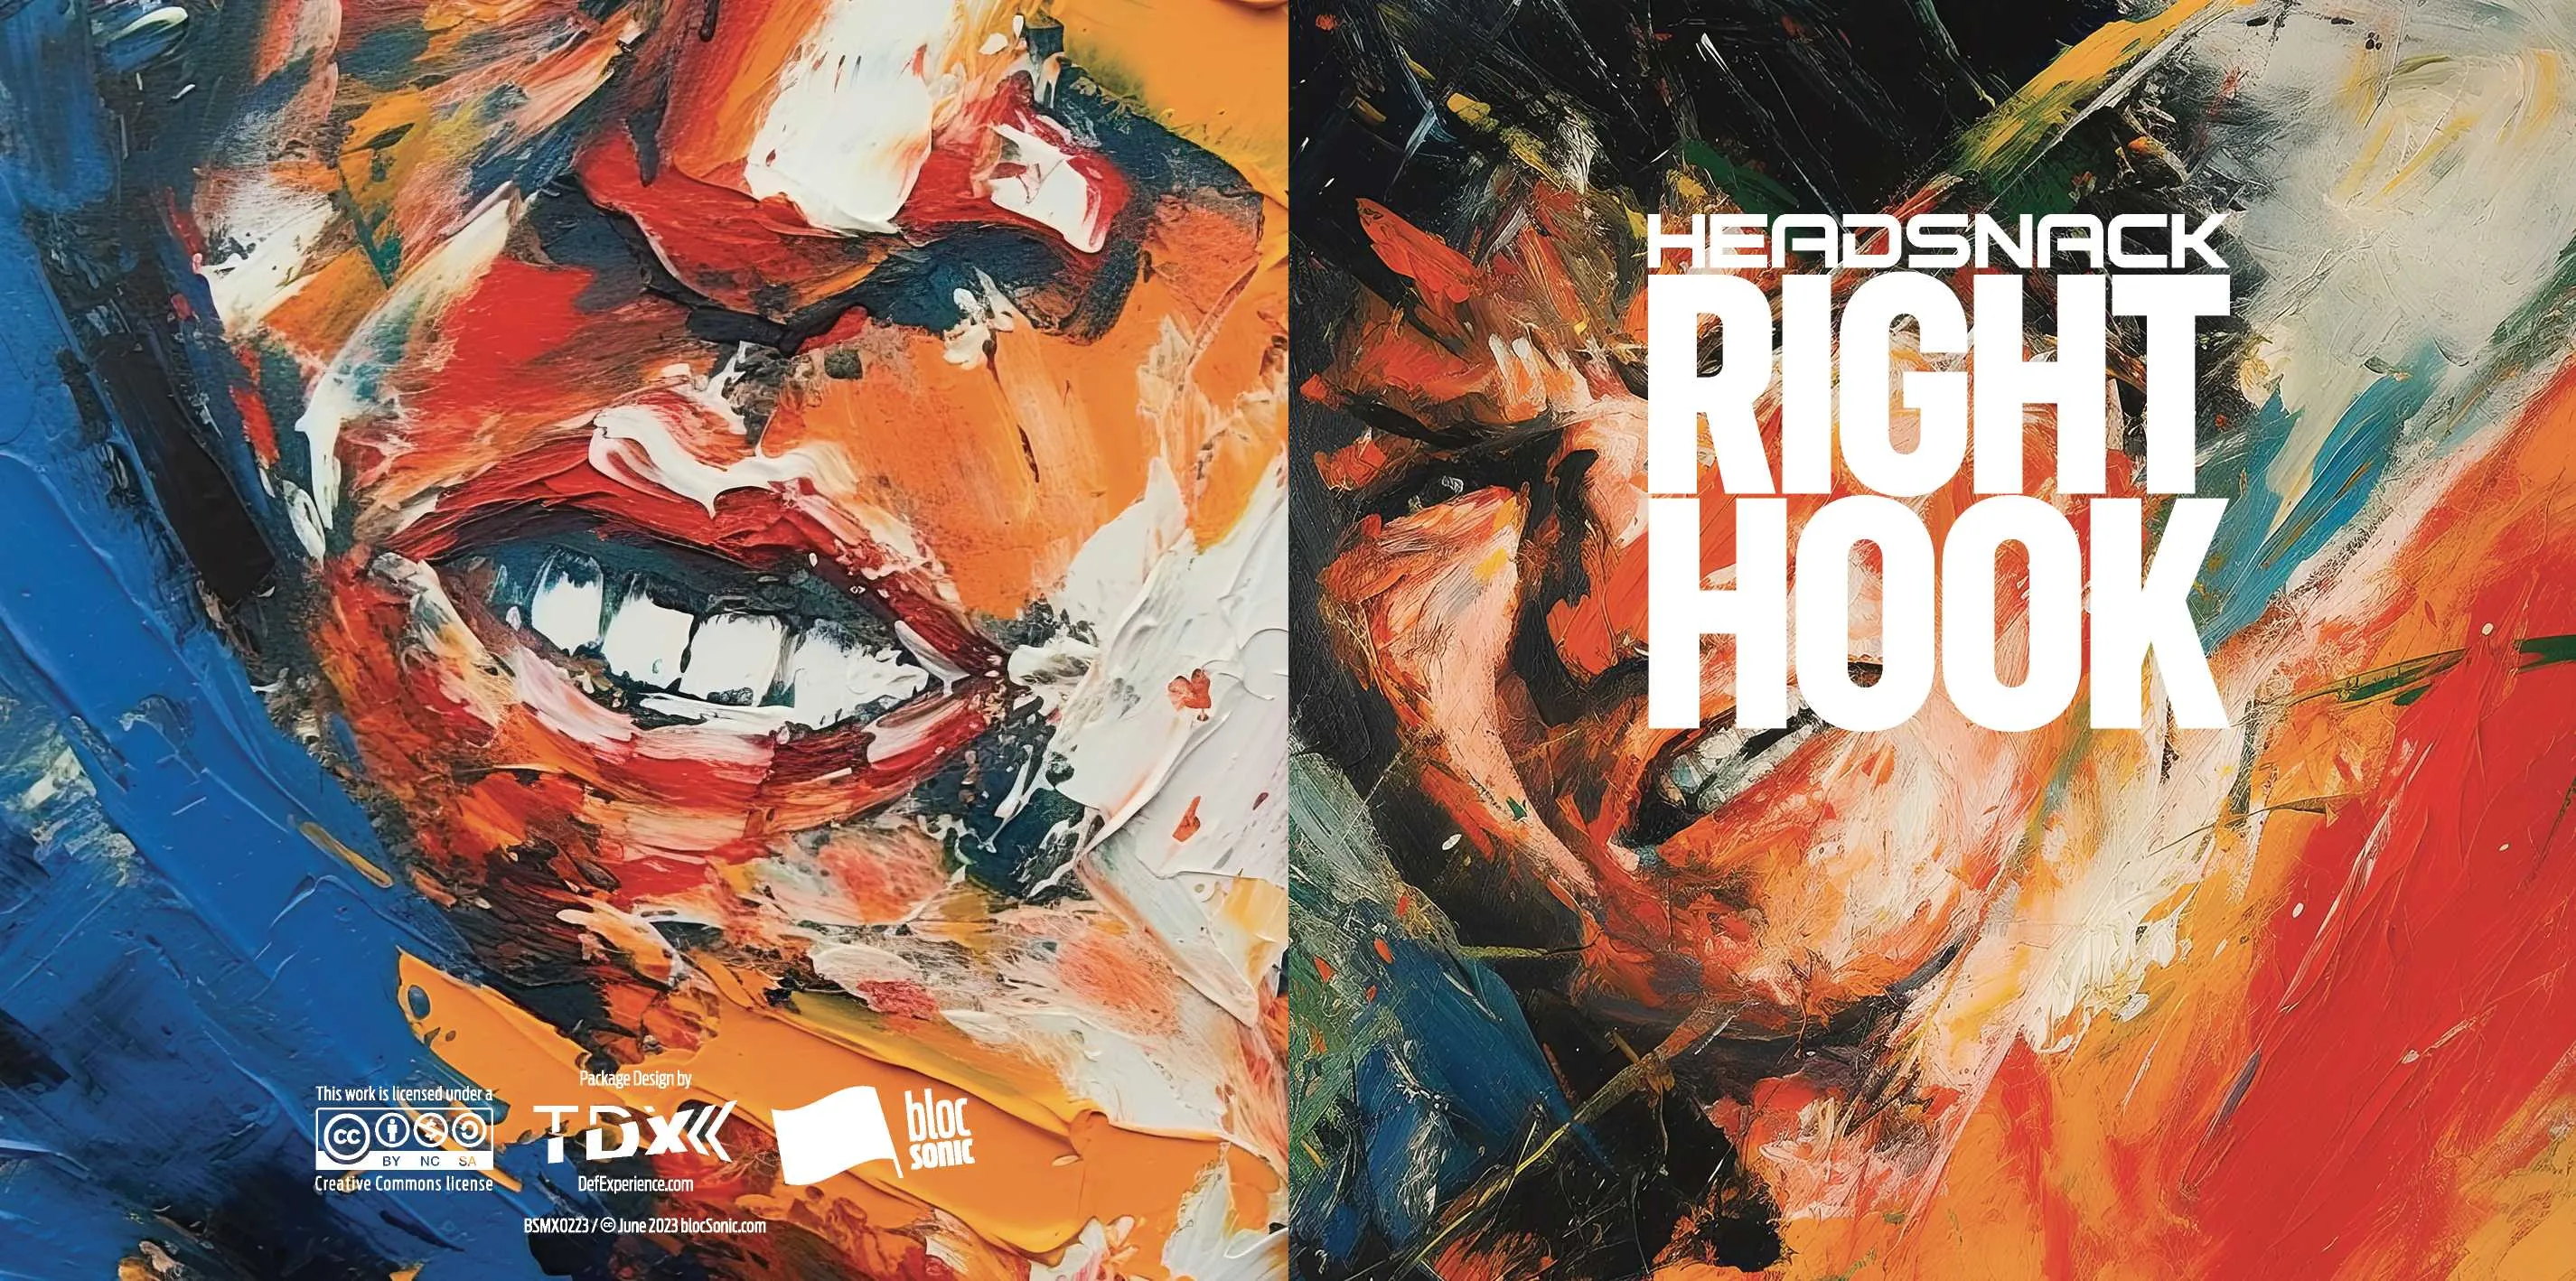 Album insert for “Right Hook” by Headsnack